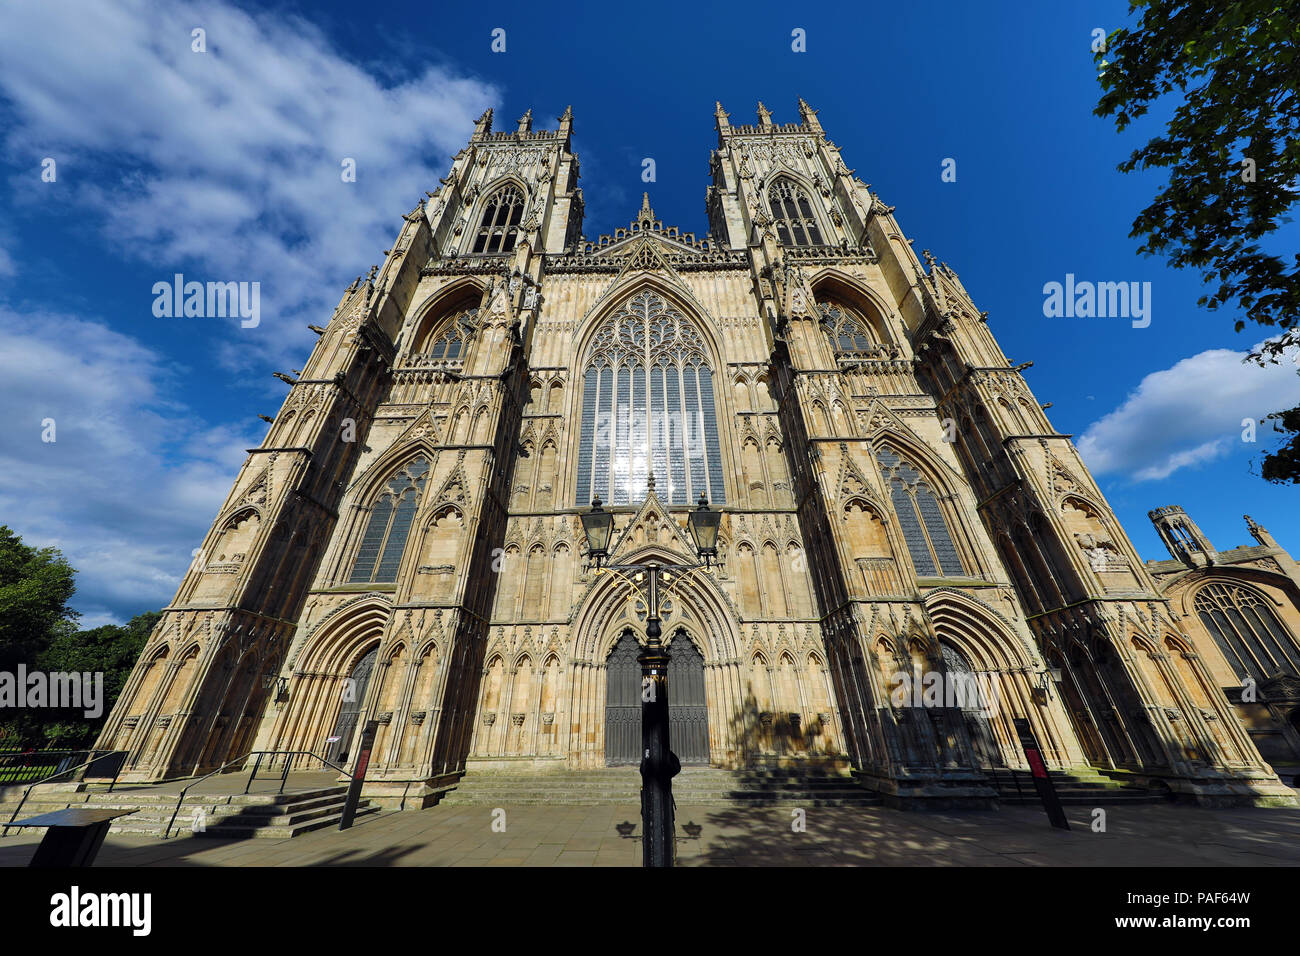 York Minster Cathedral in York, Yorkshire, England Stock Photo